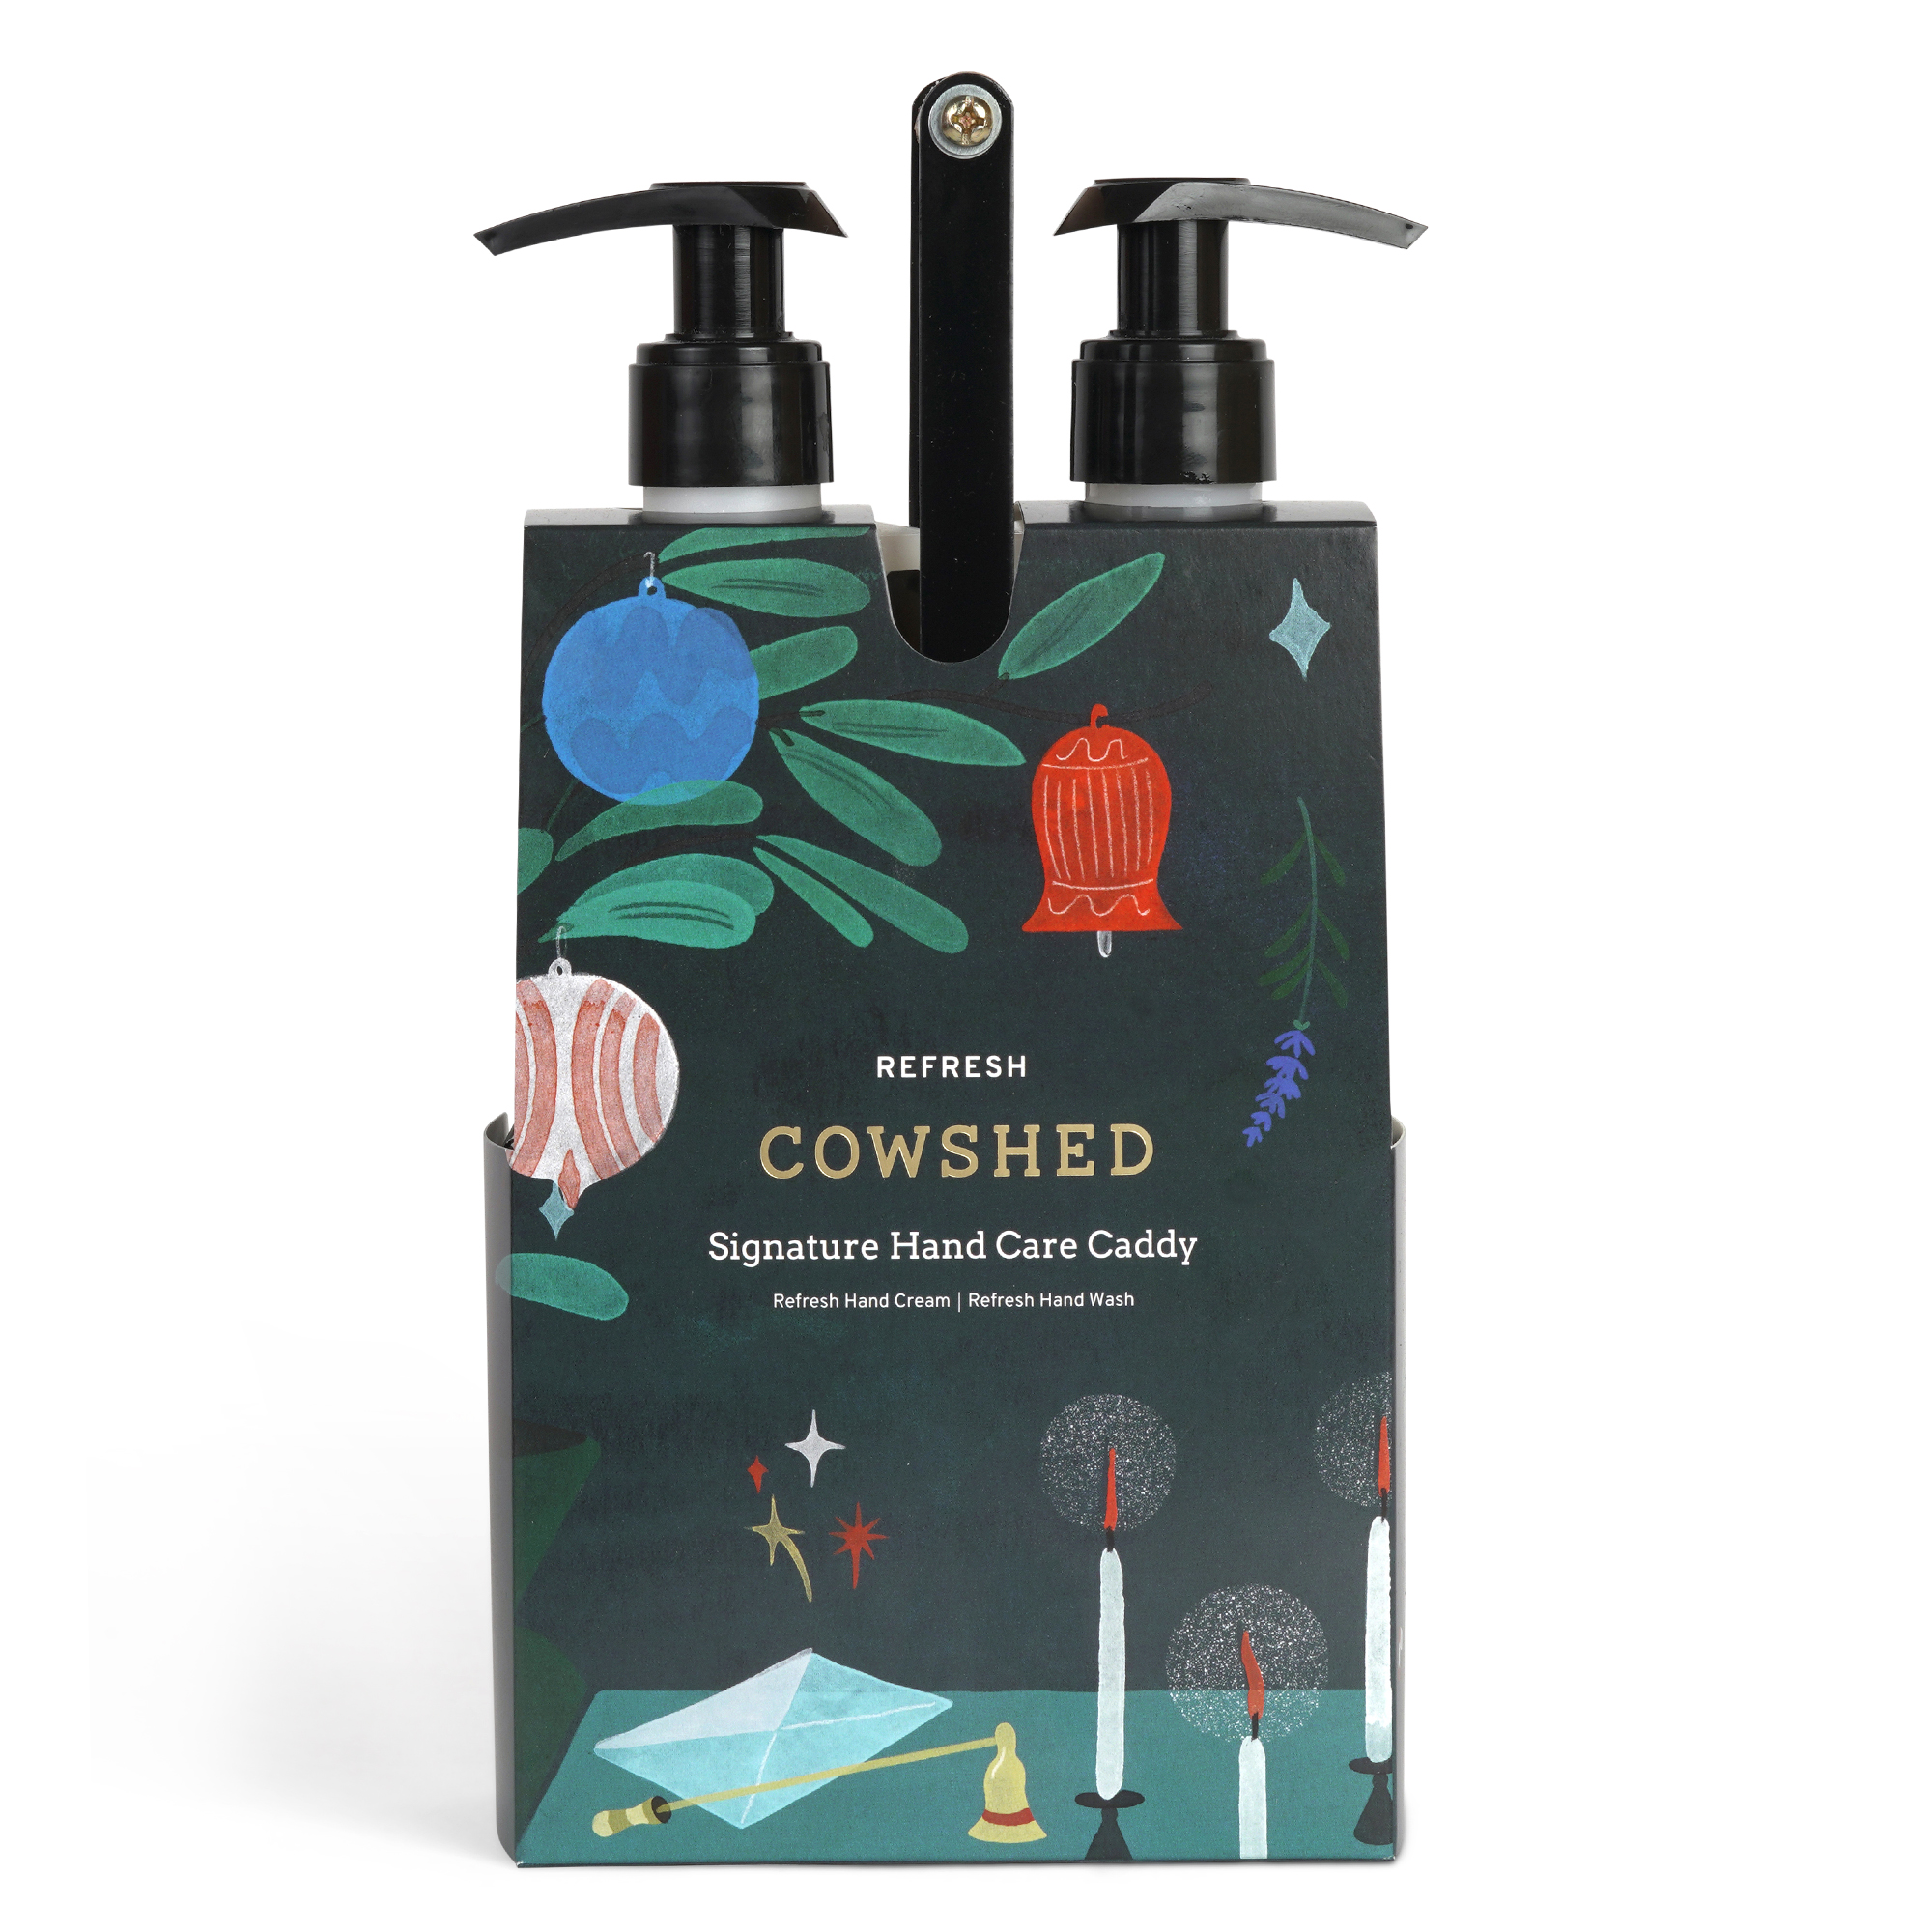 Cowshed Signature Hand Care Gift Set